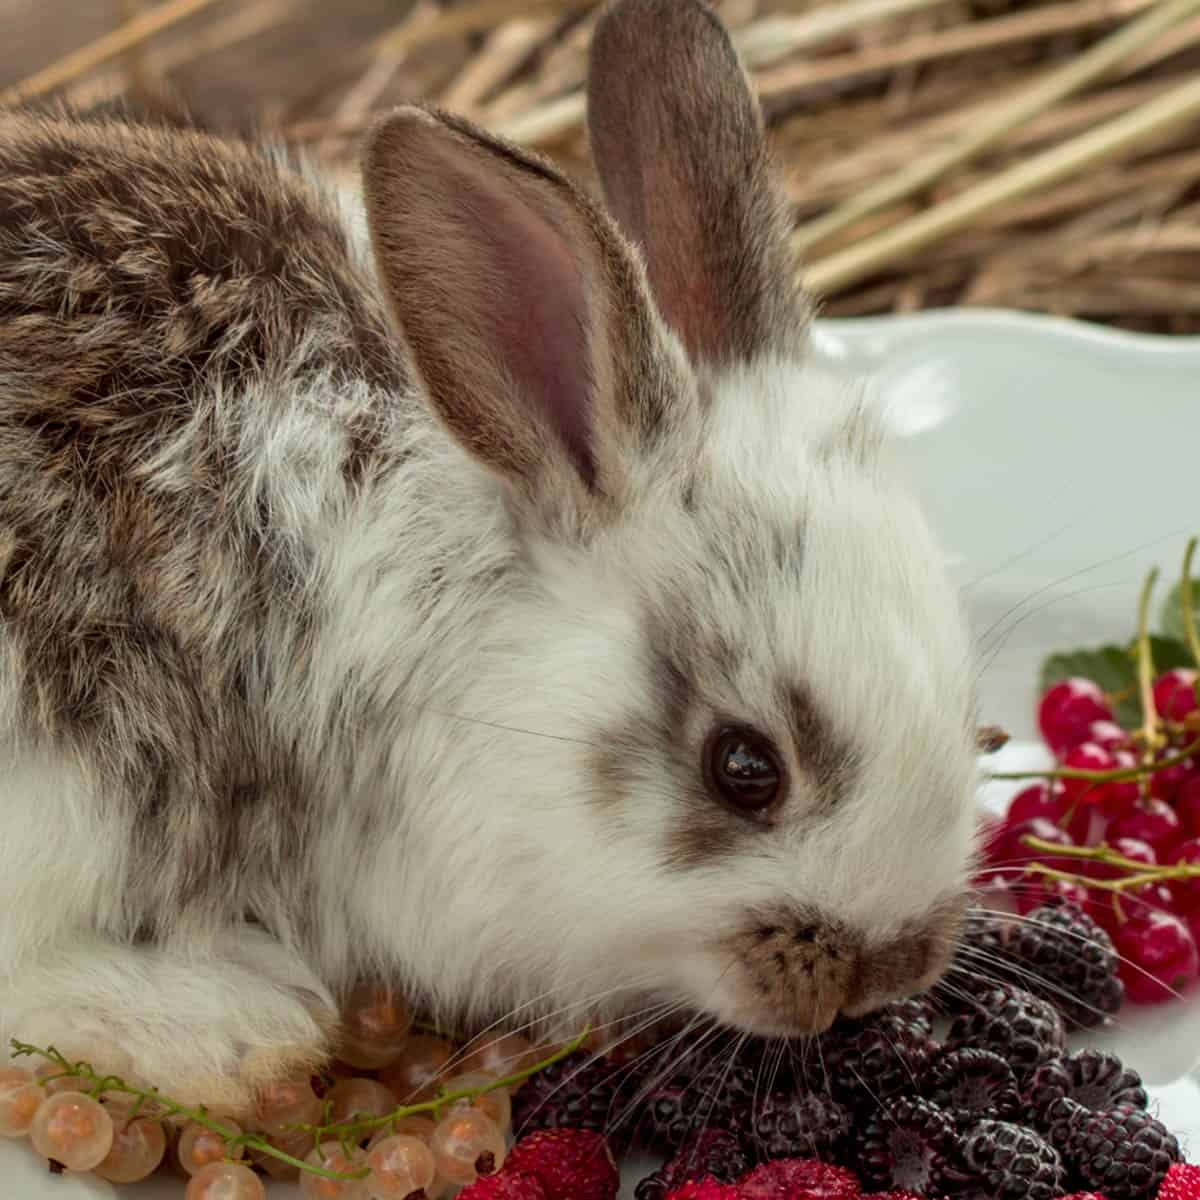 Rabbit eating blackberries from a plate